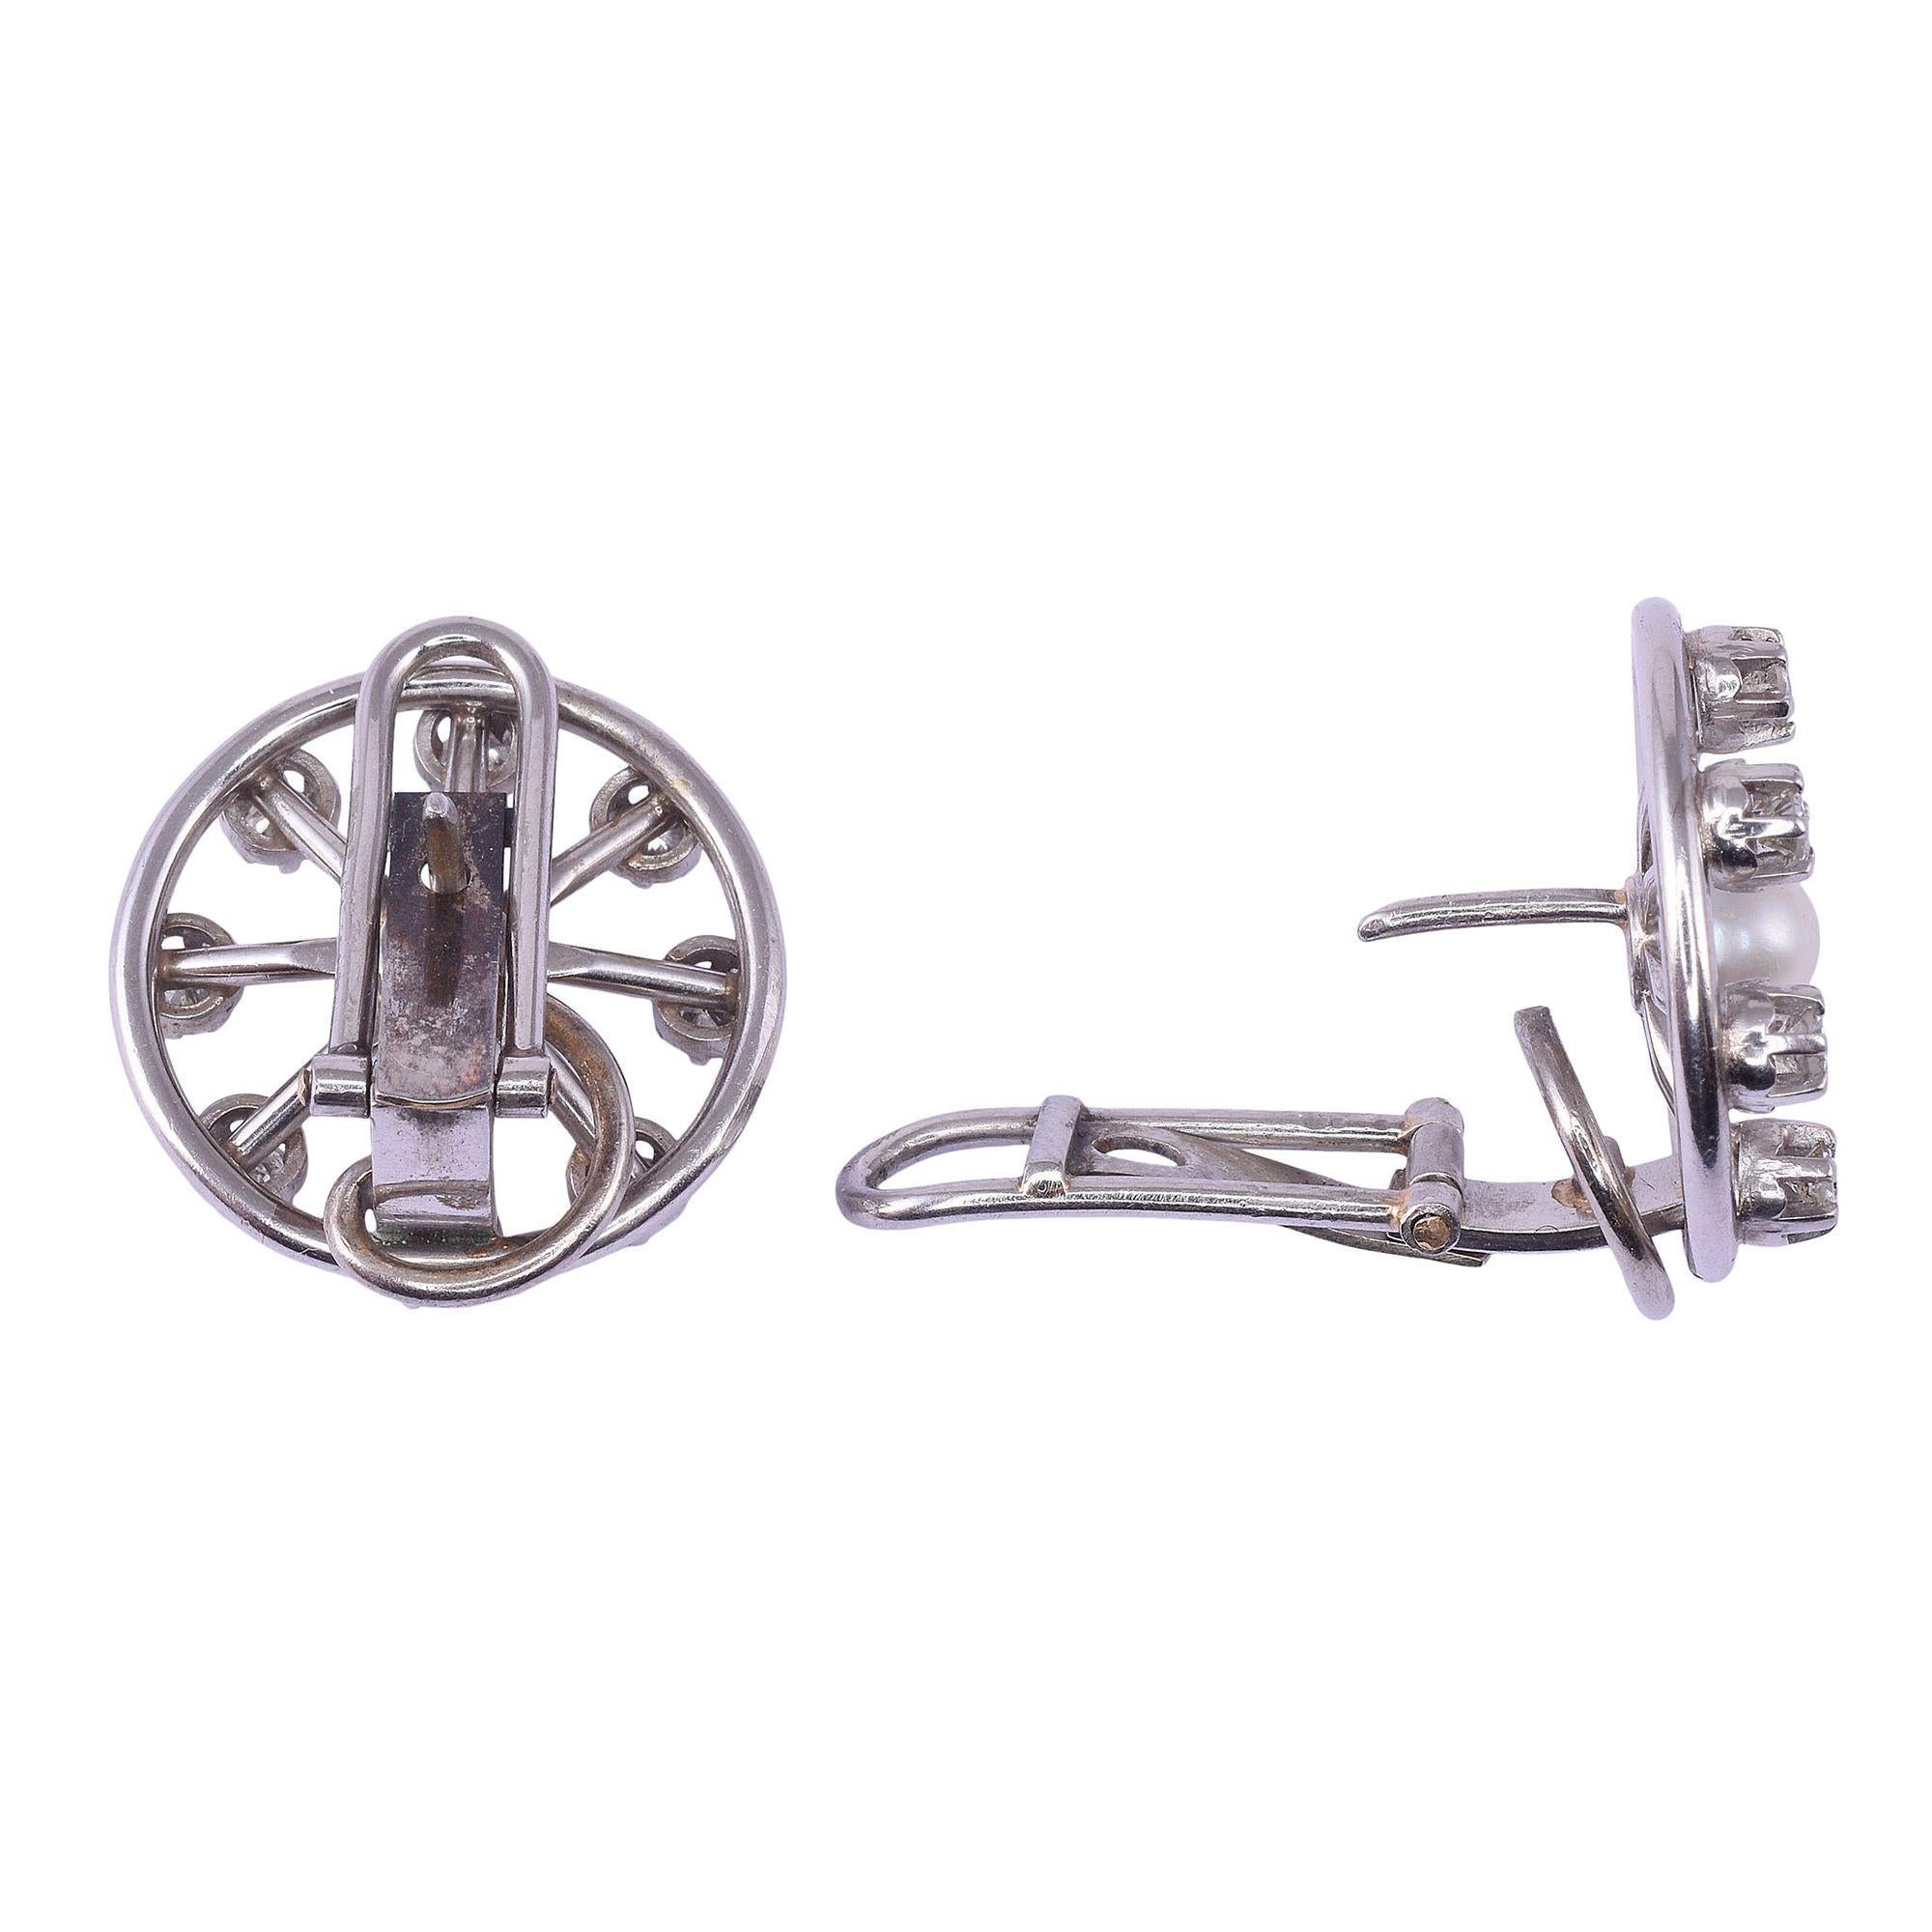 Vintage pearl & diamond spoke design platinum earrings, circa 1950. These round earrings are crafted in platinum with a spoke design featuring a 5.0mm pearl at center and .88 carat total weight of diamonds at the ends of the spokes. The diamonds